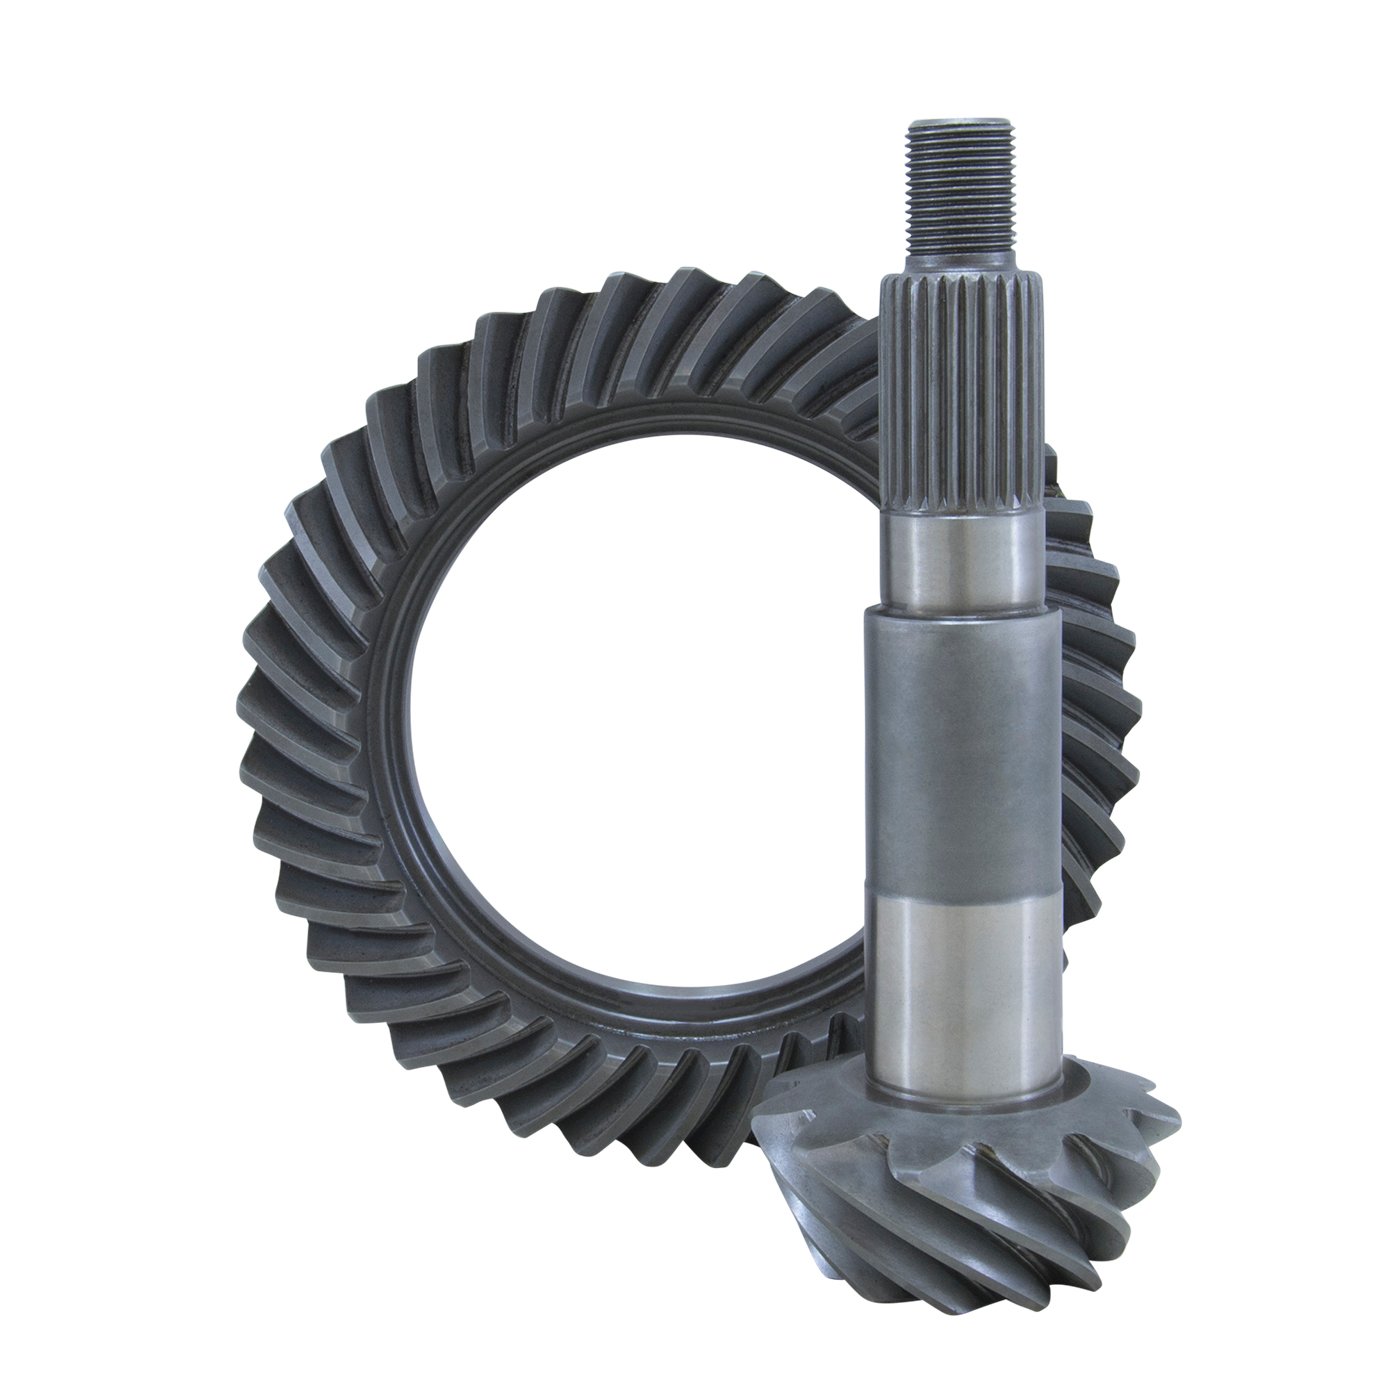 USA Standard ZG D30-427 Ring & Pinion Replacement